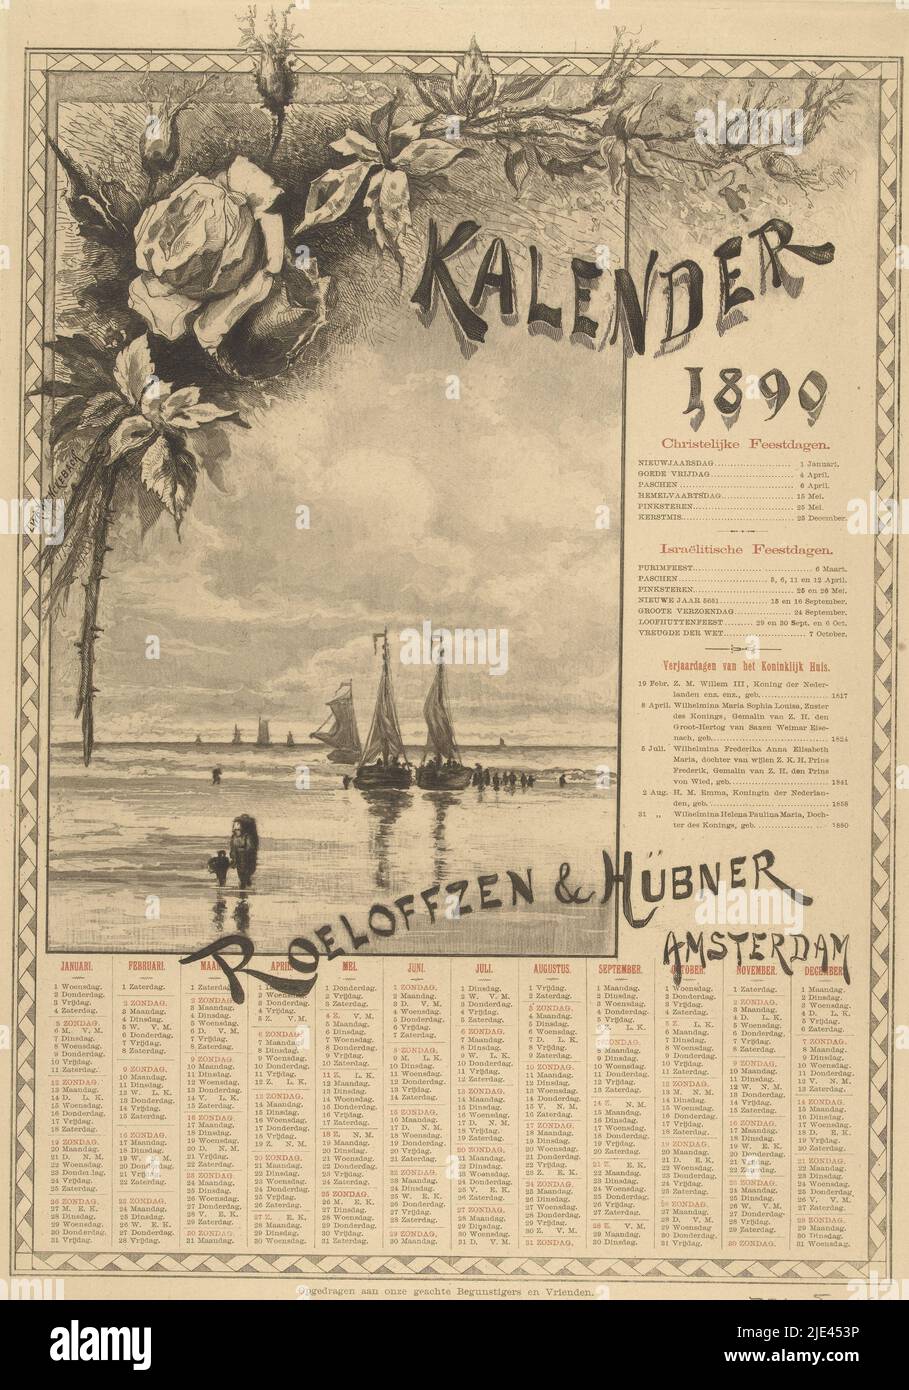 Calendar sheet for the year 1890, Petrus Johannes Arendzen, after Willem Wenckebach, 1889, Calendar sheet for the customers of printing house Roeloffzen &amp; Hübner in Amsterdam, depicting a seascape with fishing boats on the beach. Next to the image lists of holidays, below the image a calendar., print maker: Petrus Johannes Arendzen, (mentioned on object), Willem Wenckebach, (mentioned on object), printer: N. V. Roeloffzen & Hübner, Amsterdam, 1889, paper, etching, letterpress printing, h 475 mm × w 330 mm Stock Photo